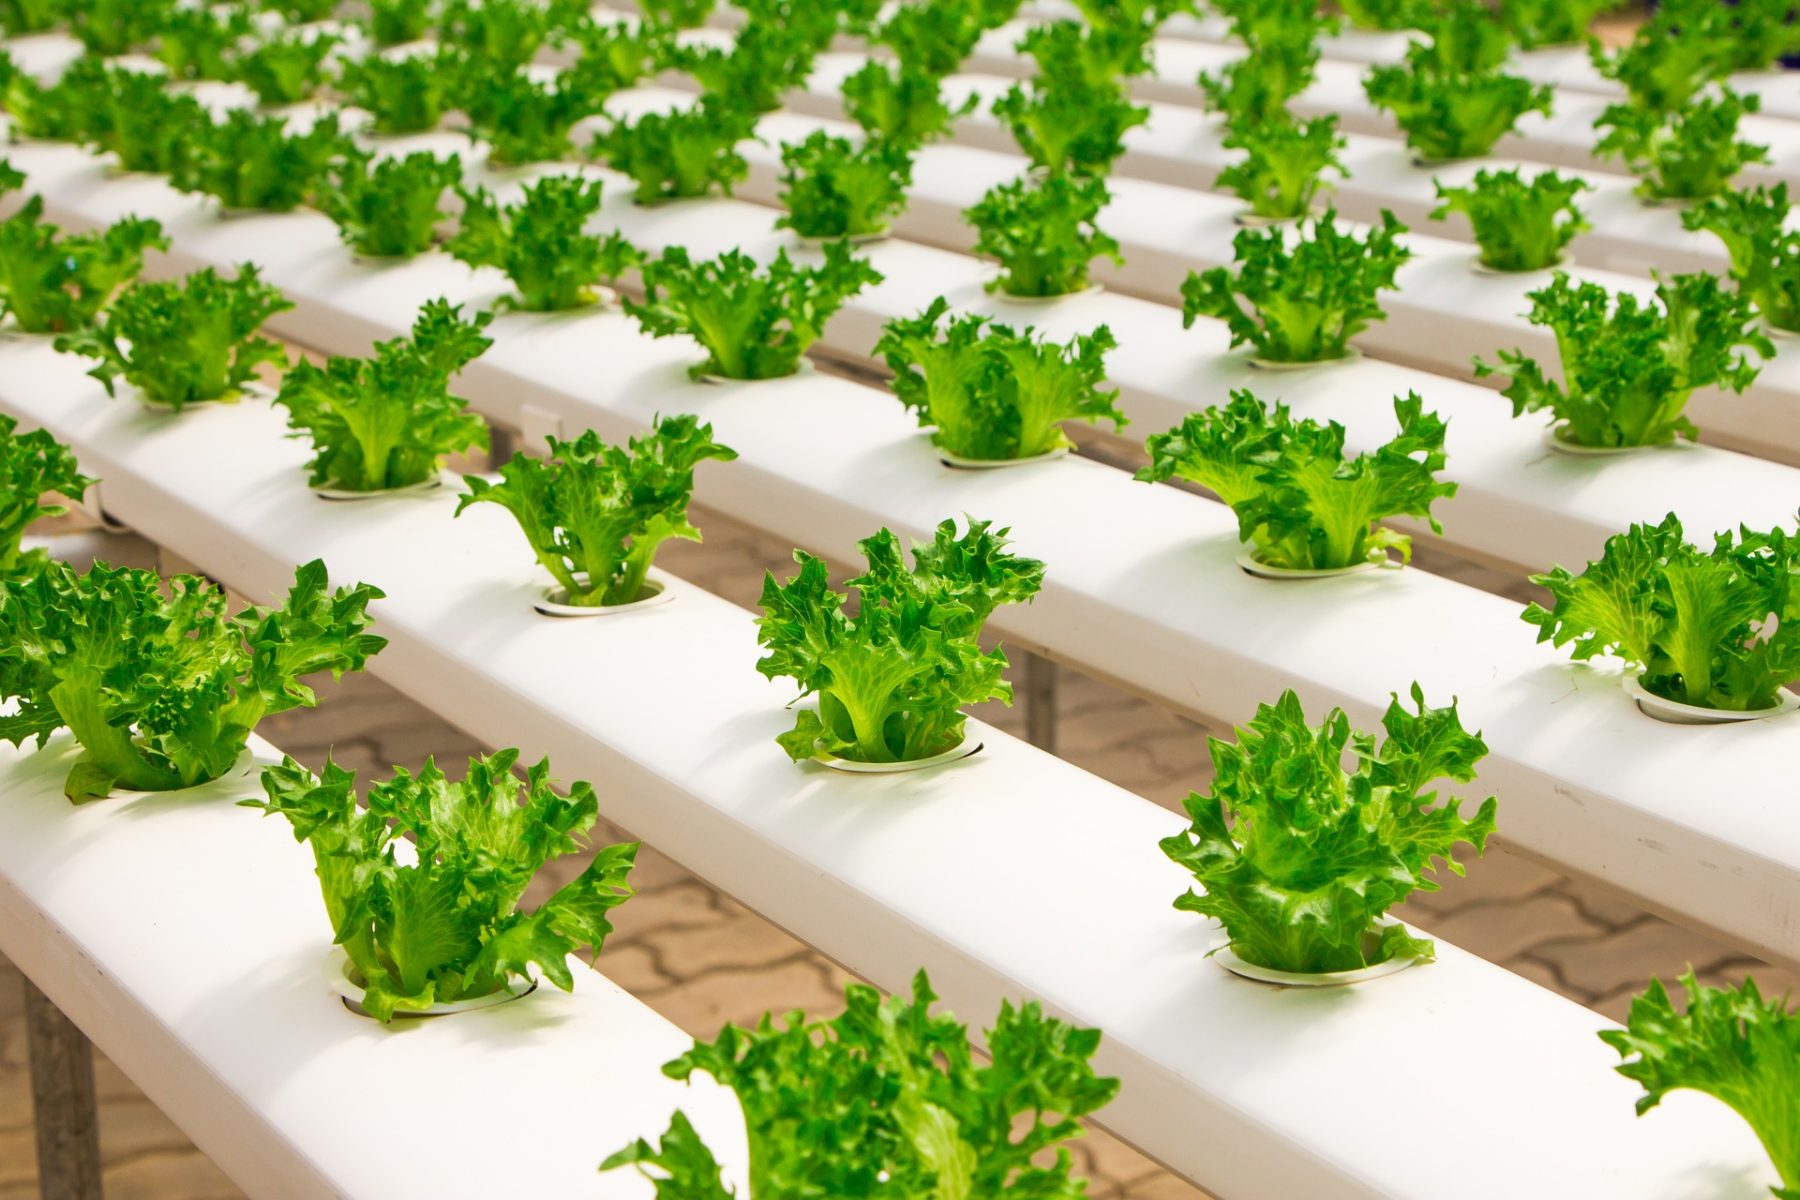 Future Farms Have Finally Arrived with Big Tech Backing